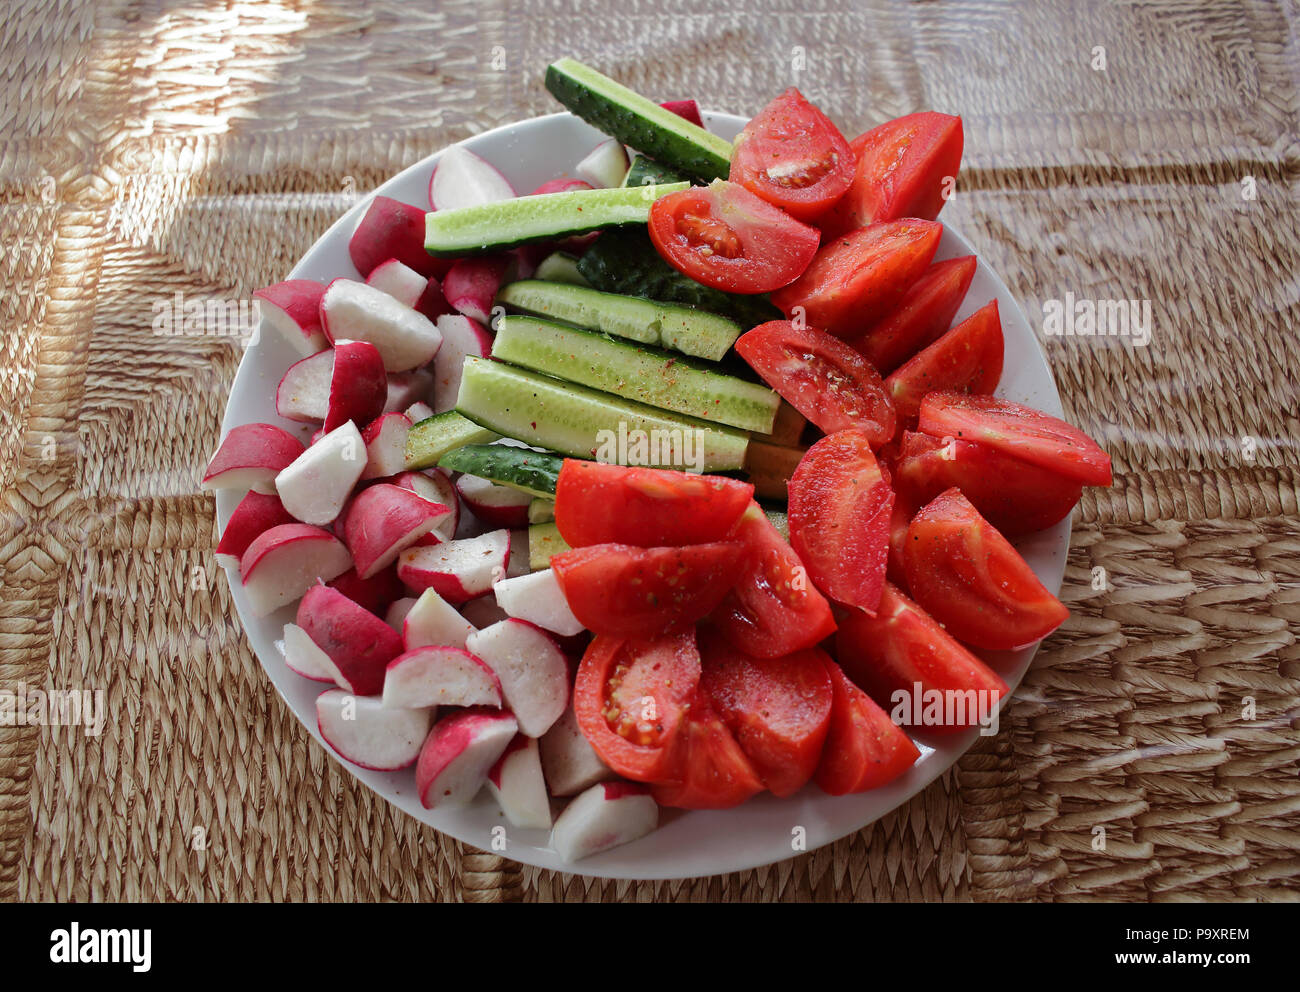 Fresh cut vegetables on the plate photo Stock Photo